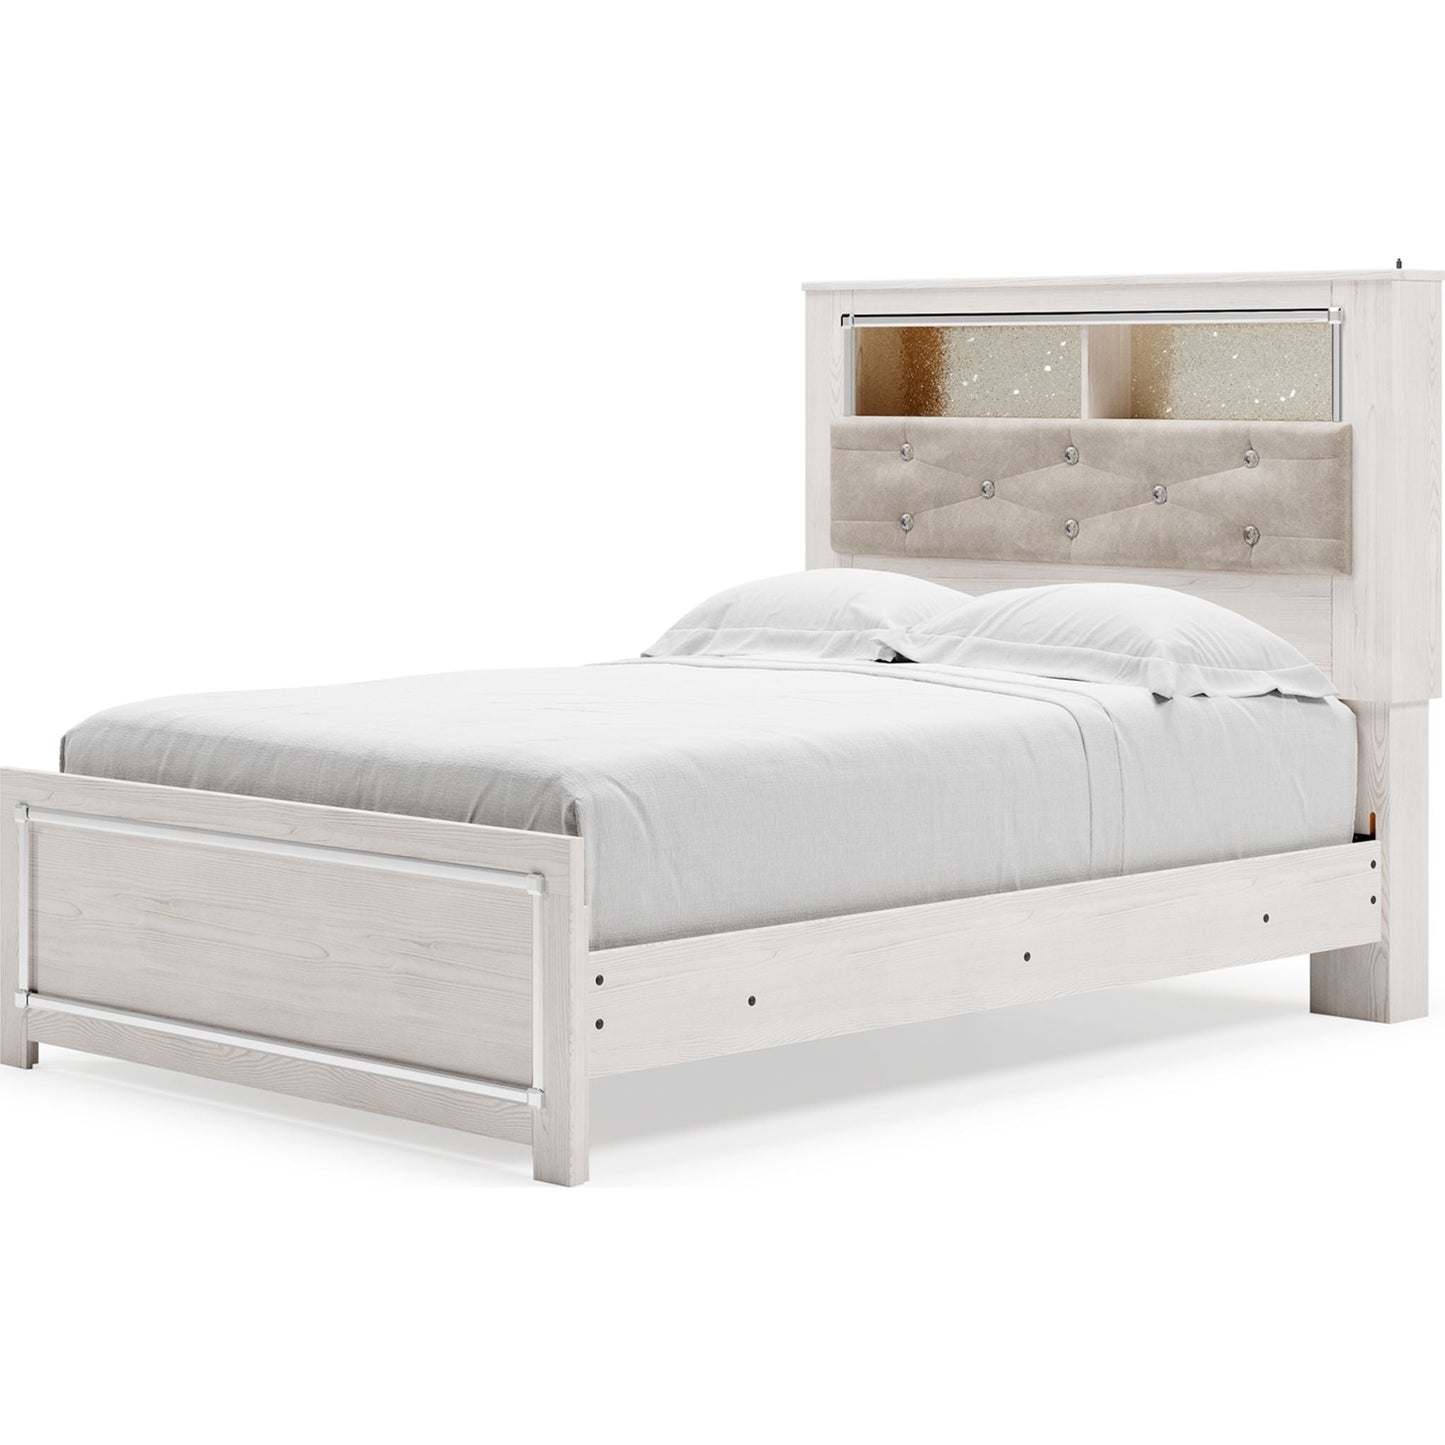 Altyra 3 Piece Full Bed - White